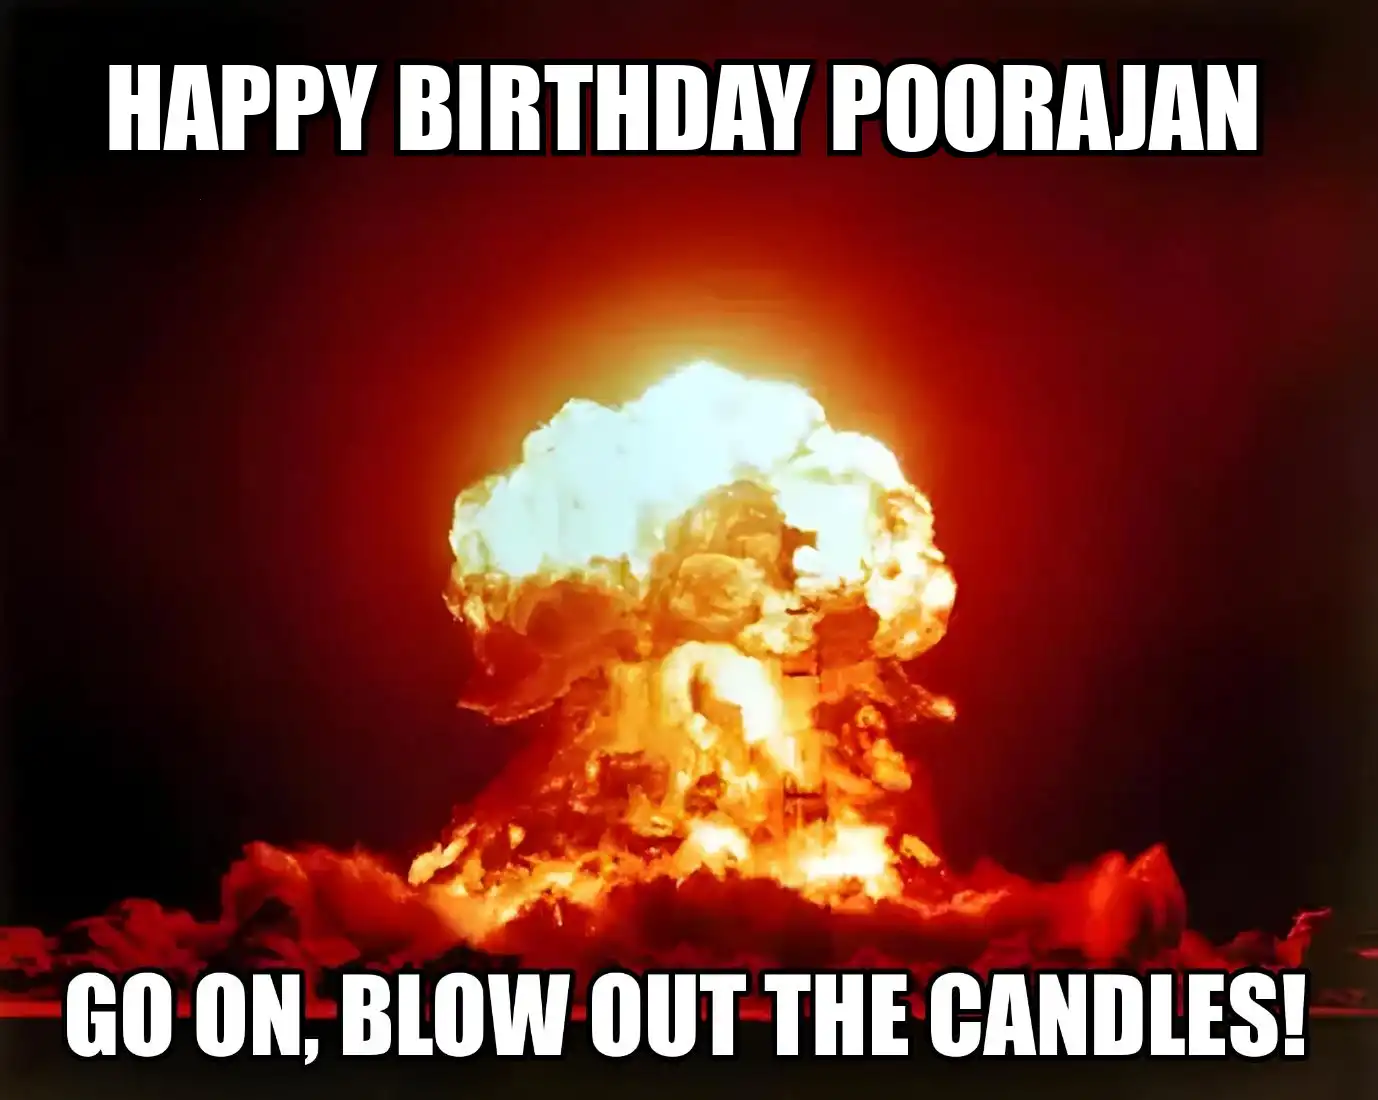 Happy Birthday Poorajan Go On Blow Out The Candles Meme